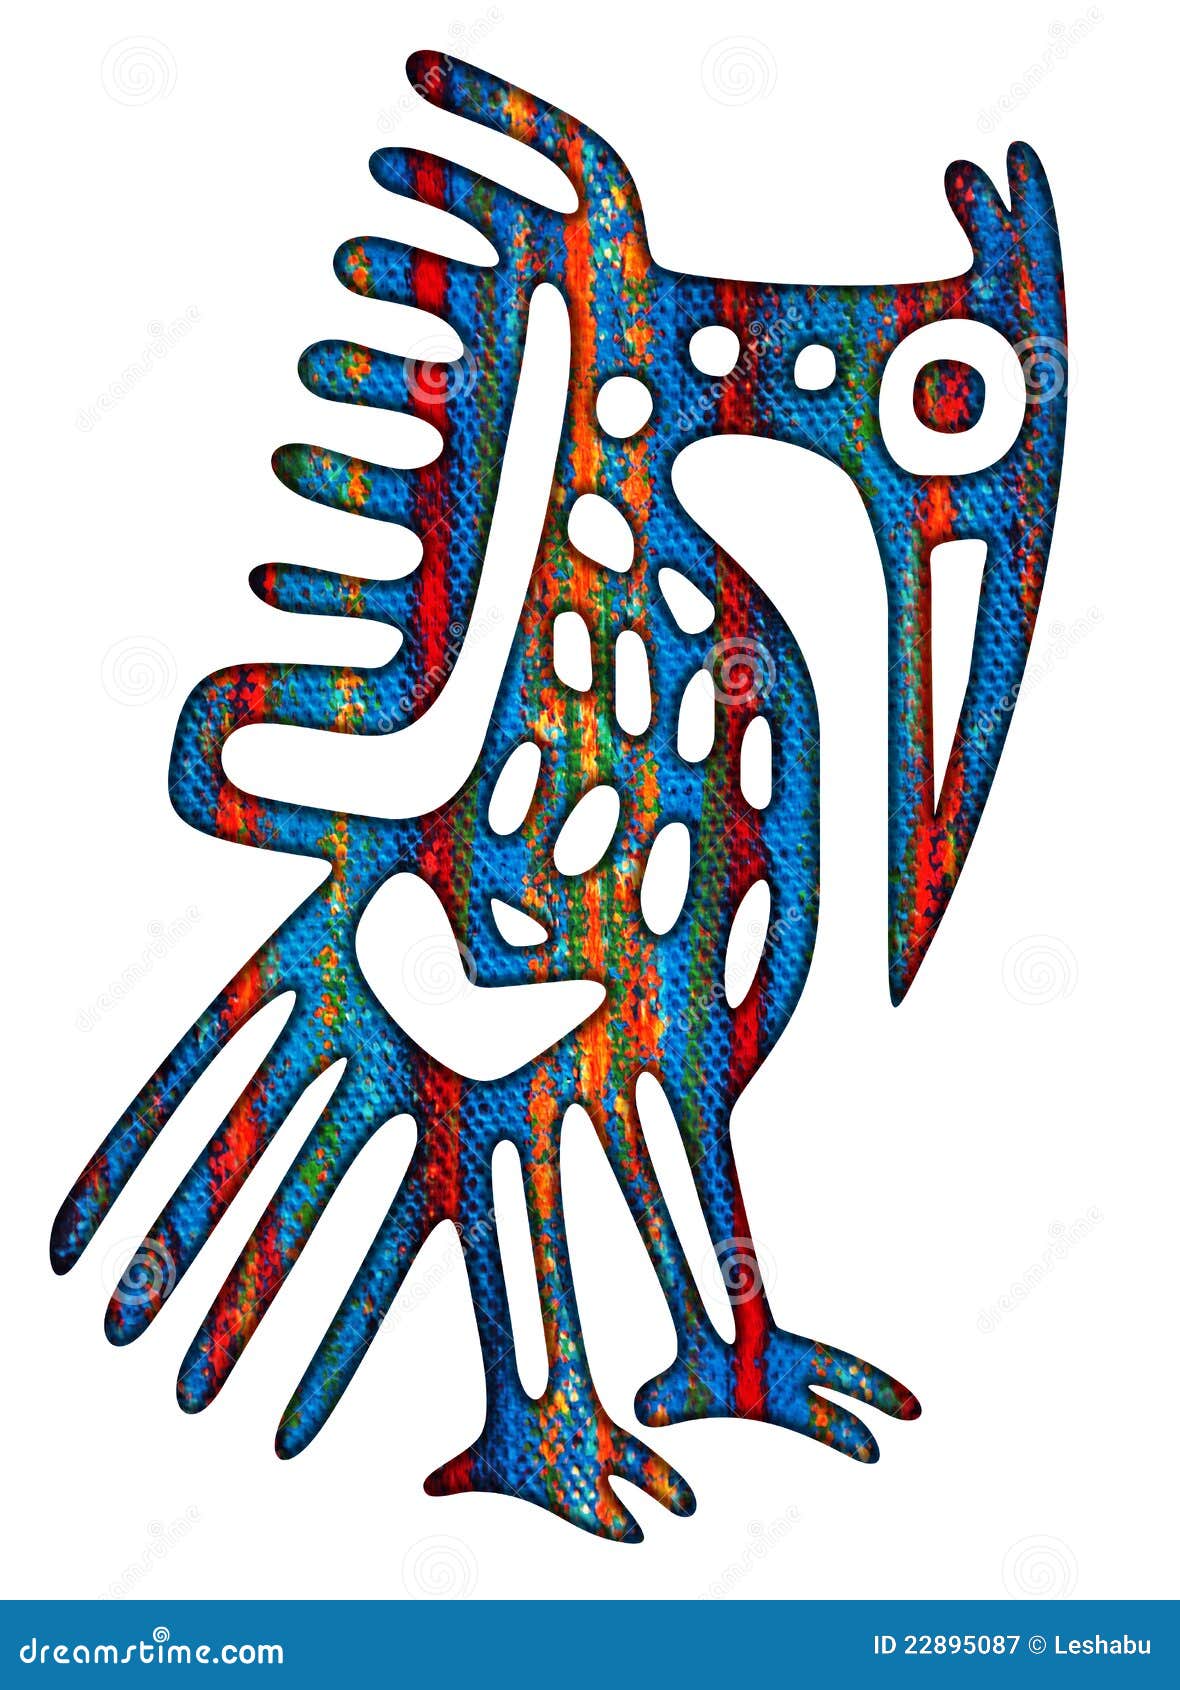 Mexican Bird (Eagle) Illustration Royalty Free Stock Photography